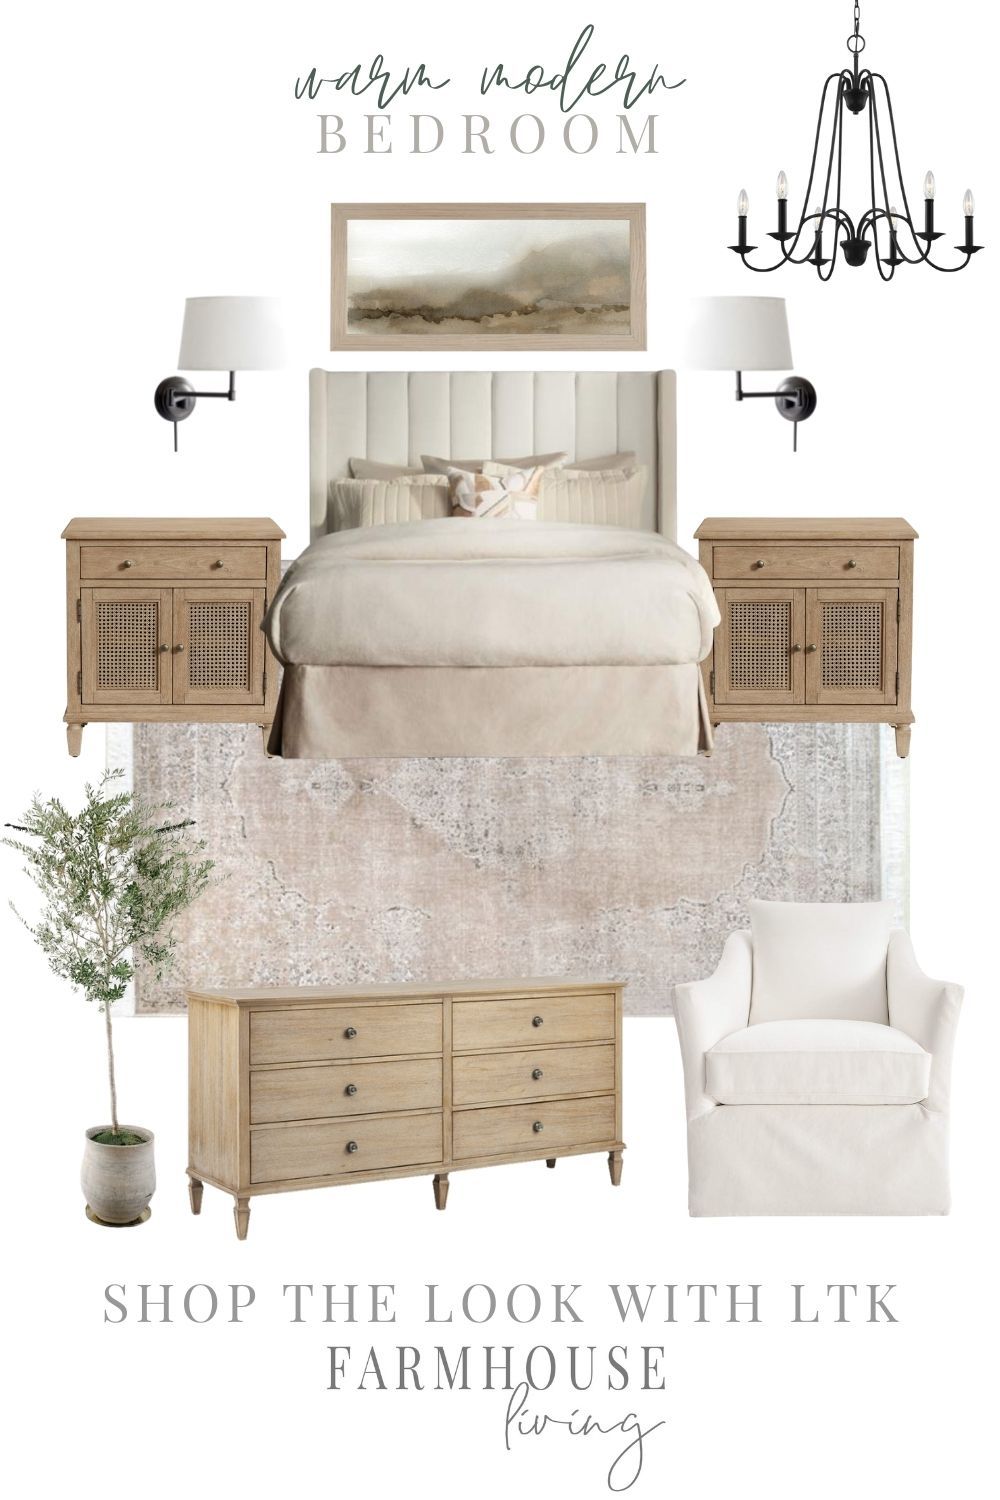 Transform Your Bedroom with These Stunning Bedroom Sets